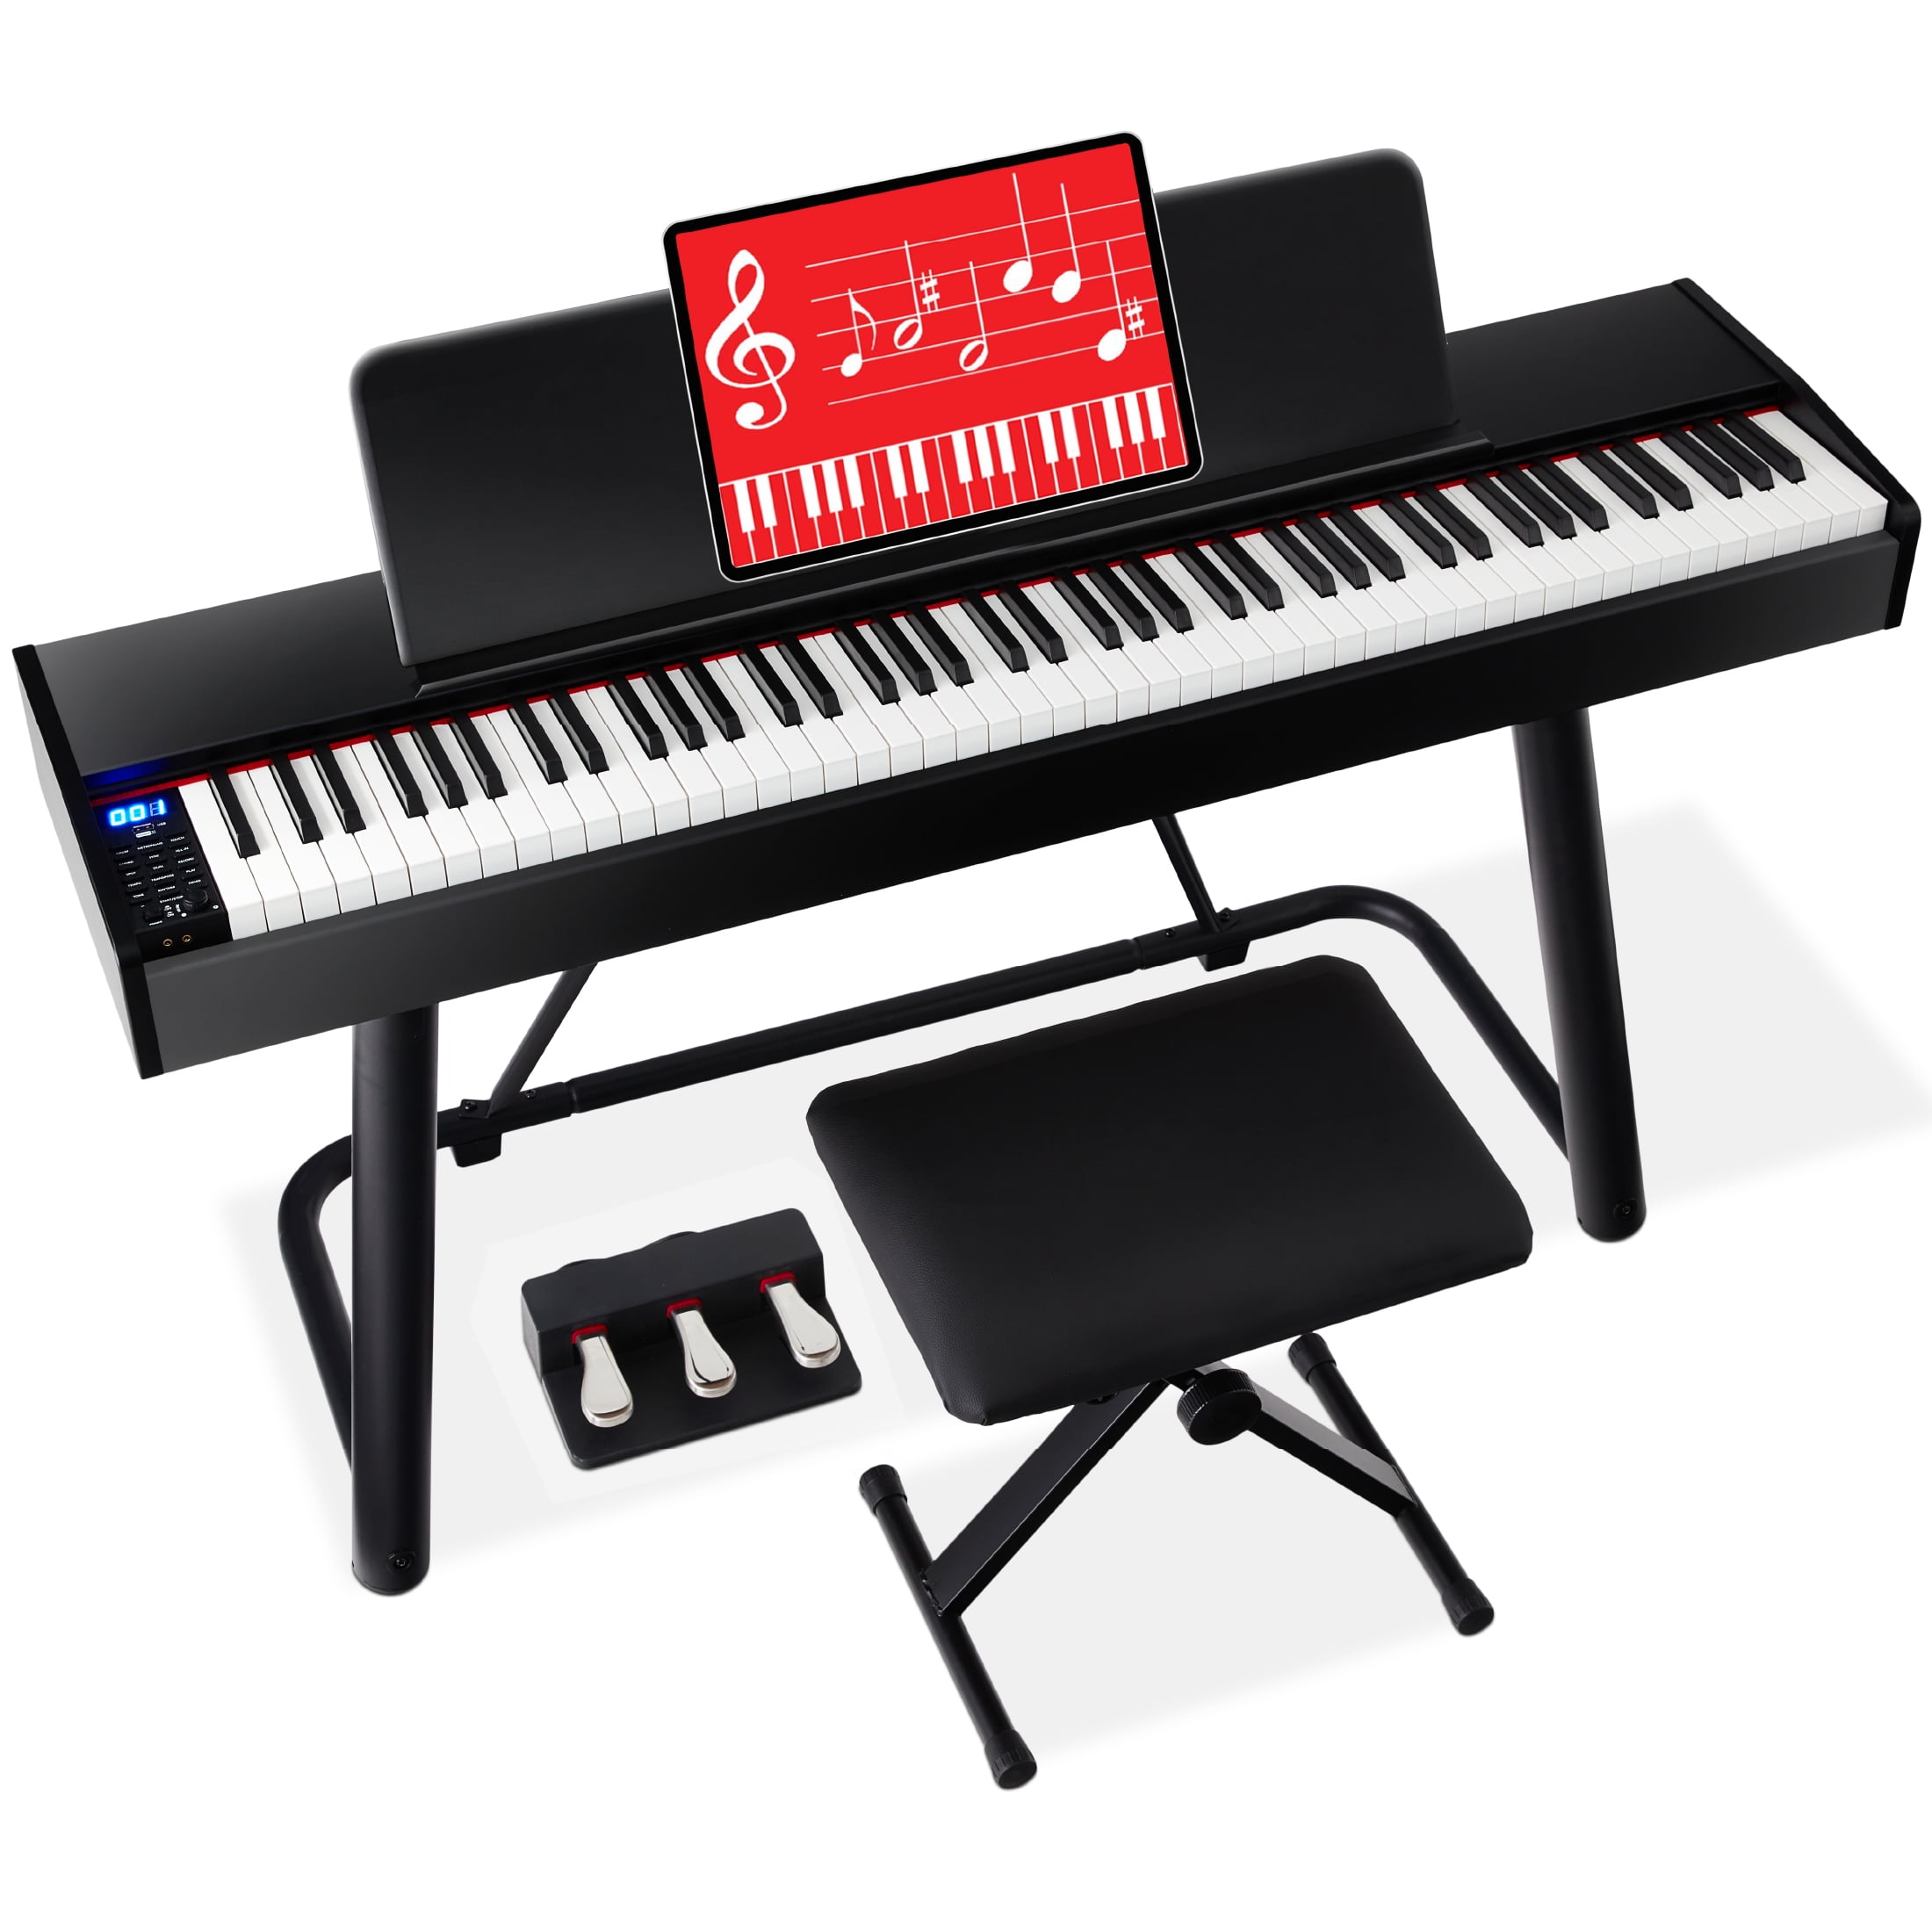 Learn piano online by yourself. Use a tablet or computer to learn piano  tutorials online. The black grand piano has a tablet placed on a notebook  stand. 3D Rendering. 6667060 Stock Photo